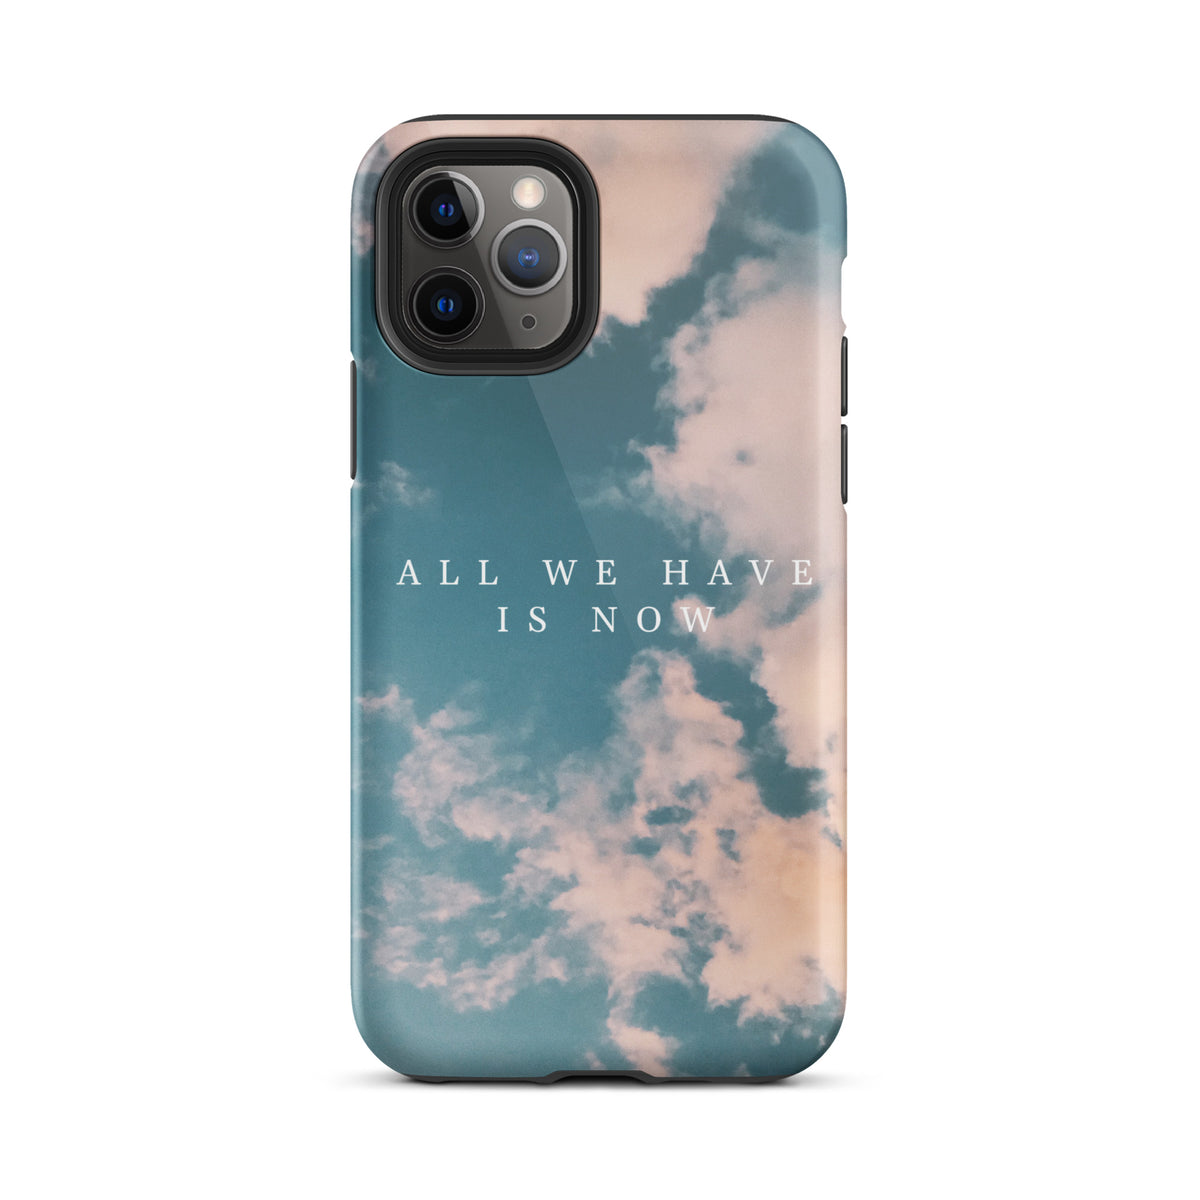 Iphone "all we have is now" text on sky and clouds